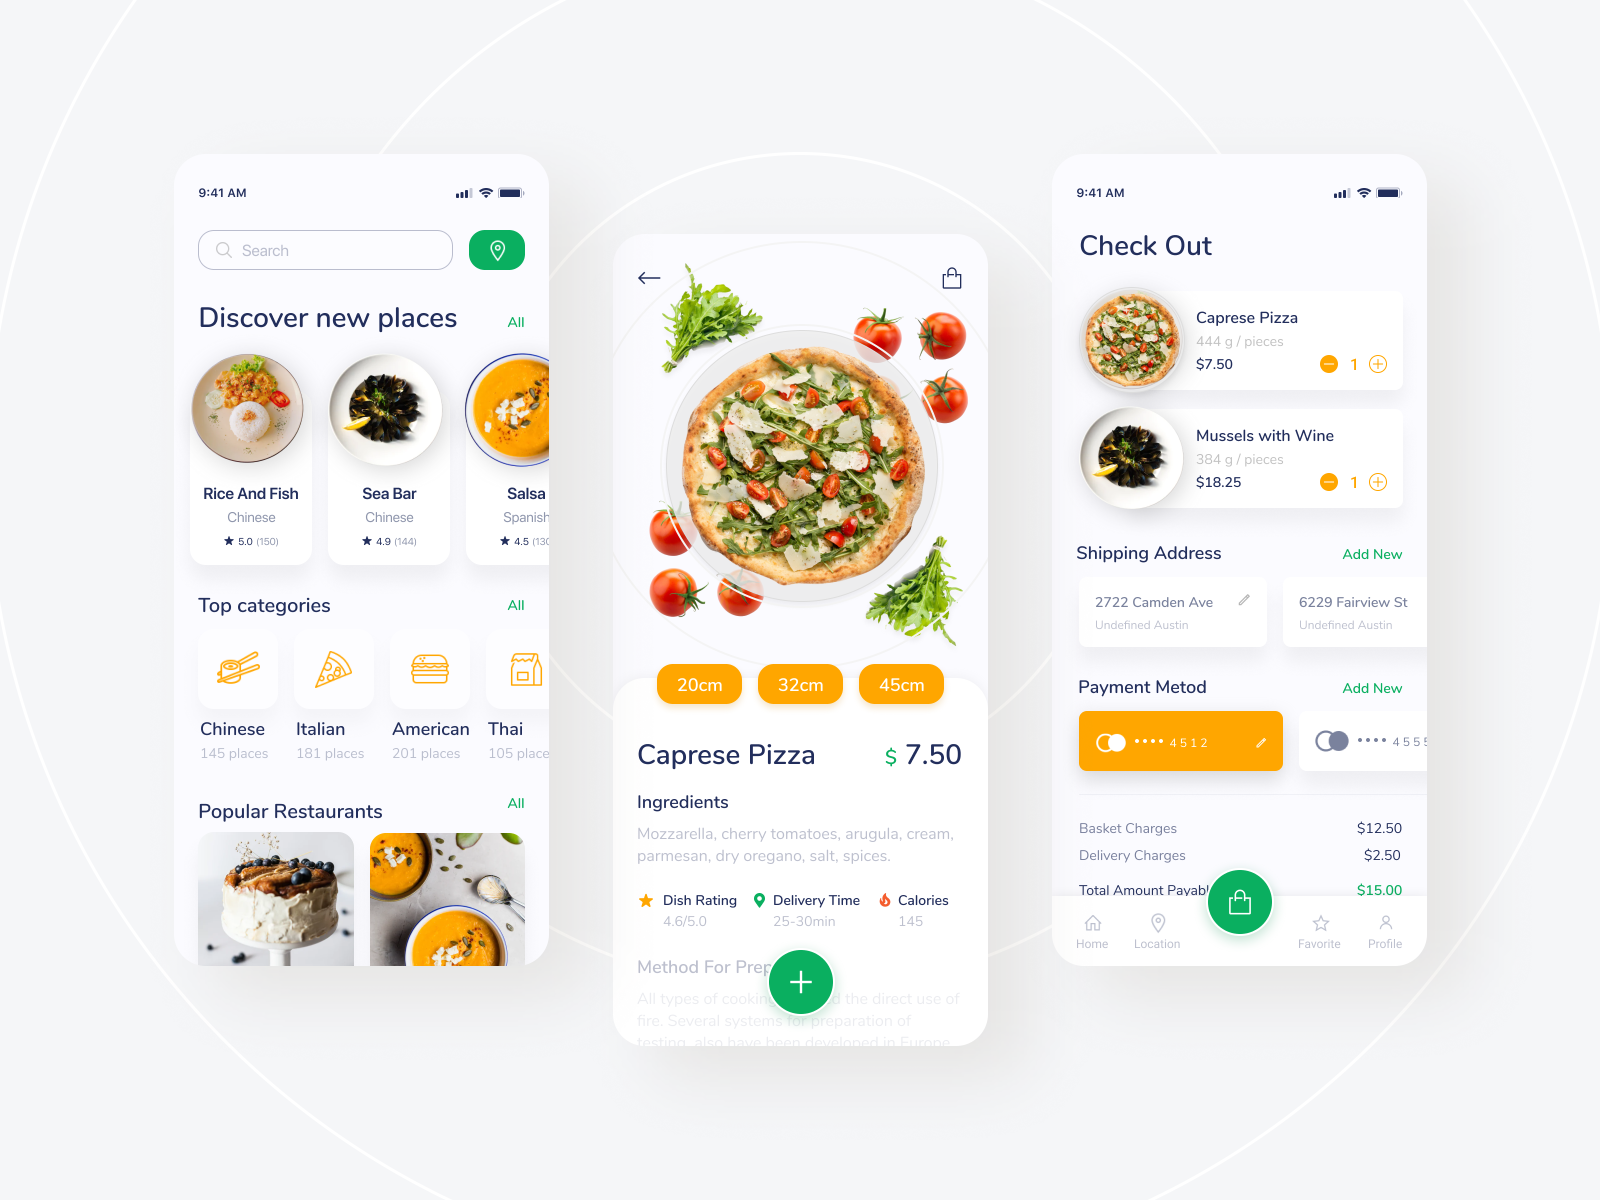 Food Delivery - Mobile App Concept by Anastasia Petrenko on Dribbble